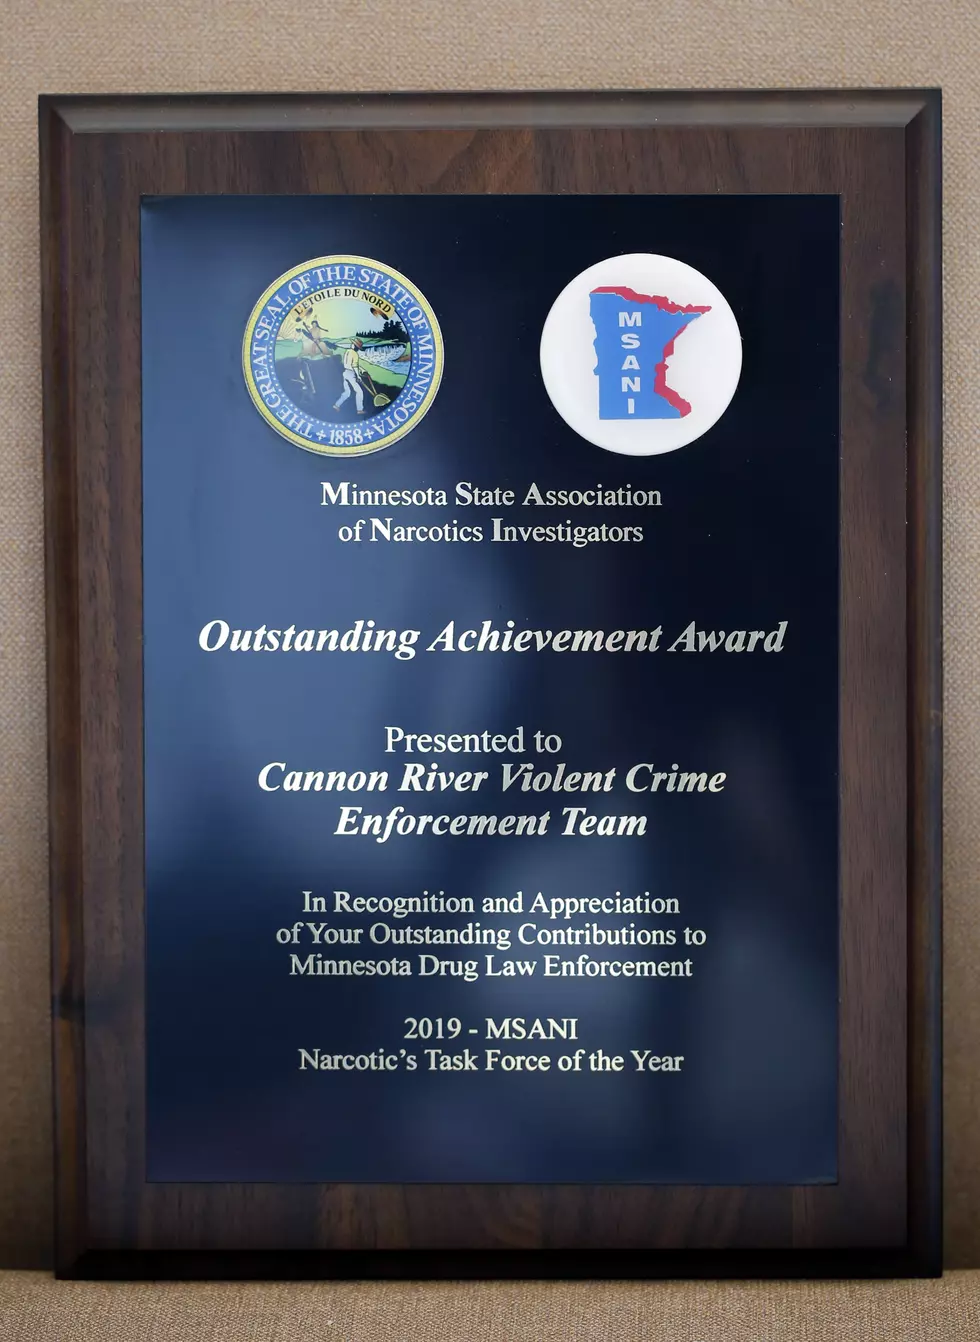 Cannon River Task Force Named Minnesota Narcotics Task Force of the Year